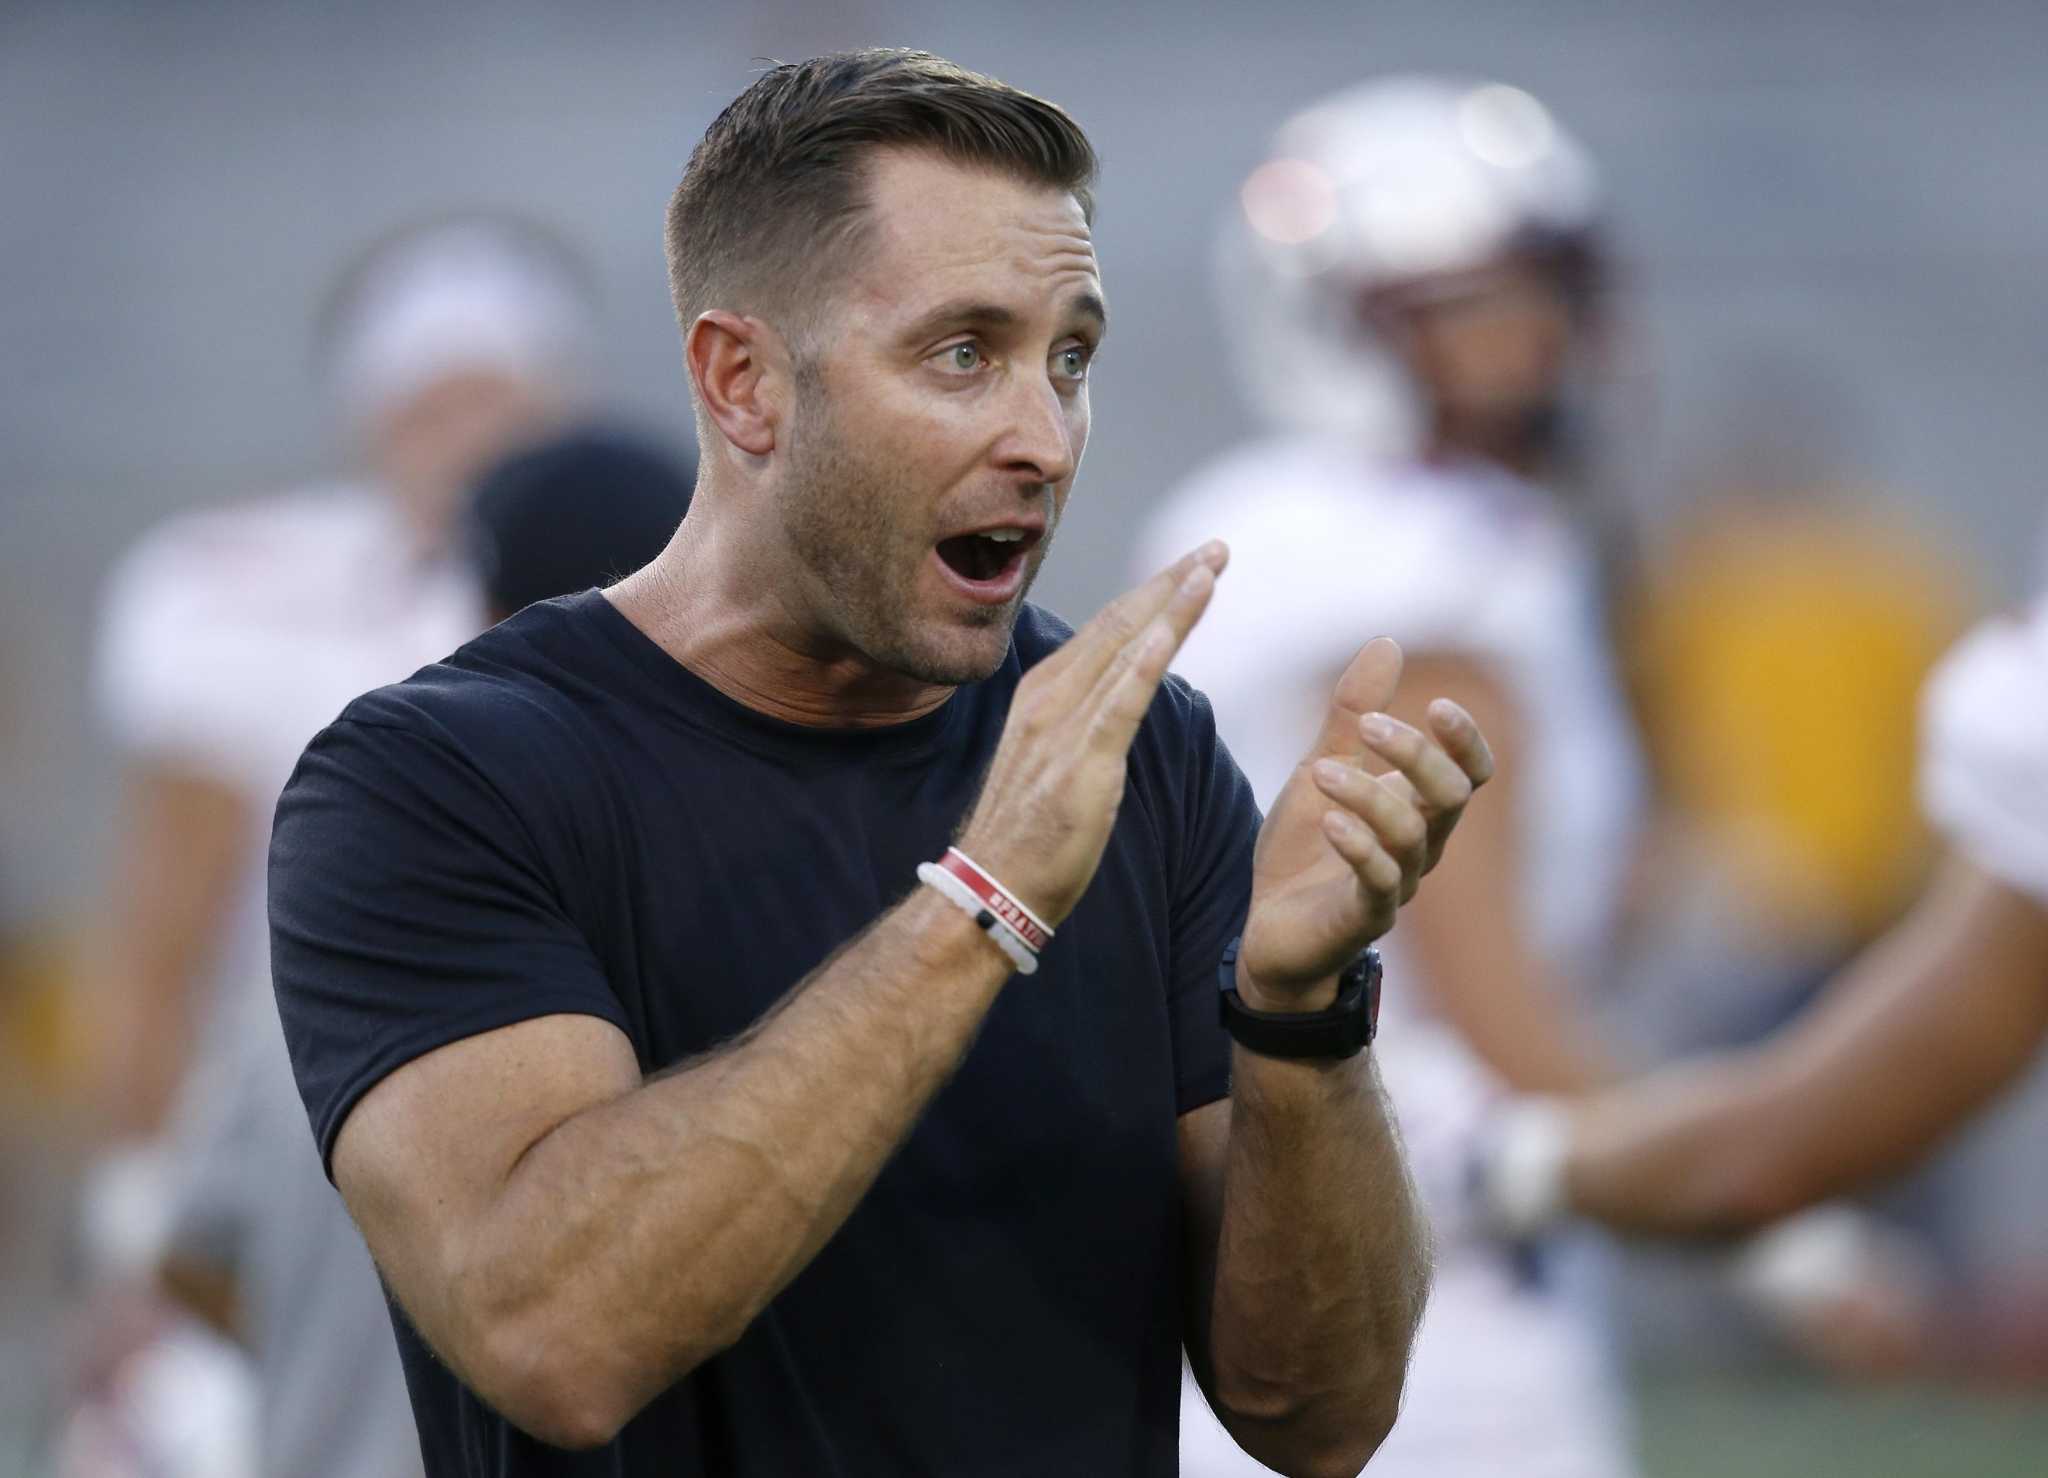 Crazy or not, NFL drawn to Kingsbury's cool